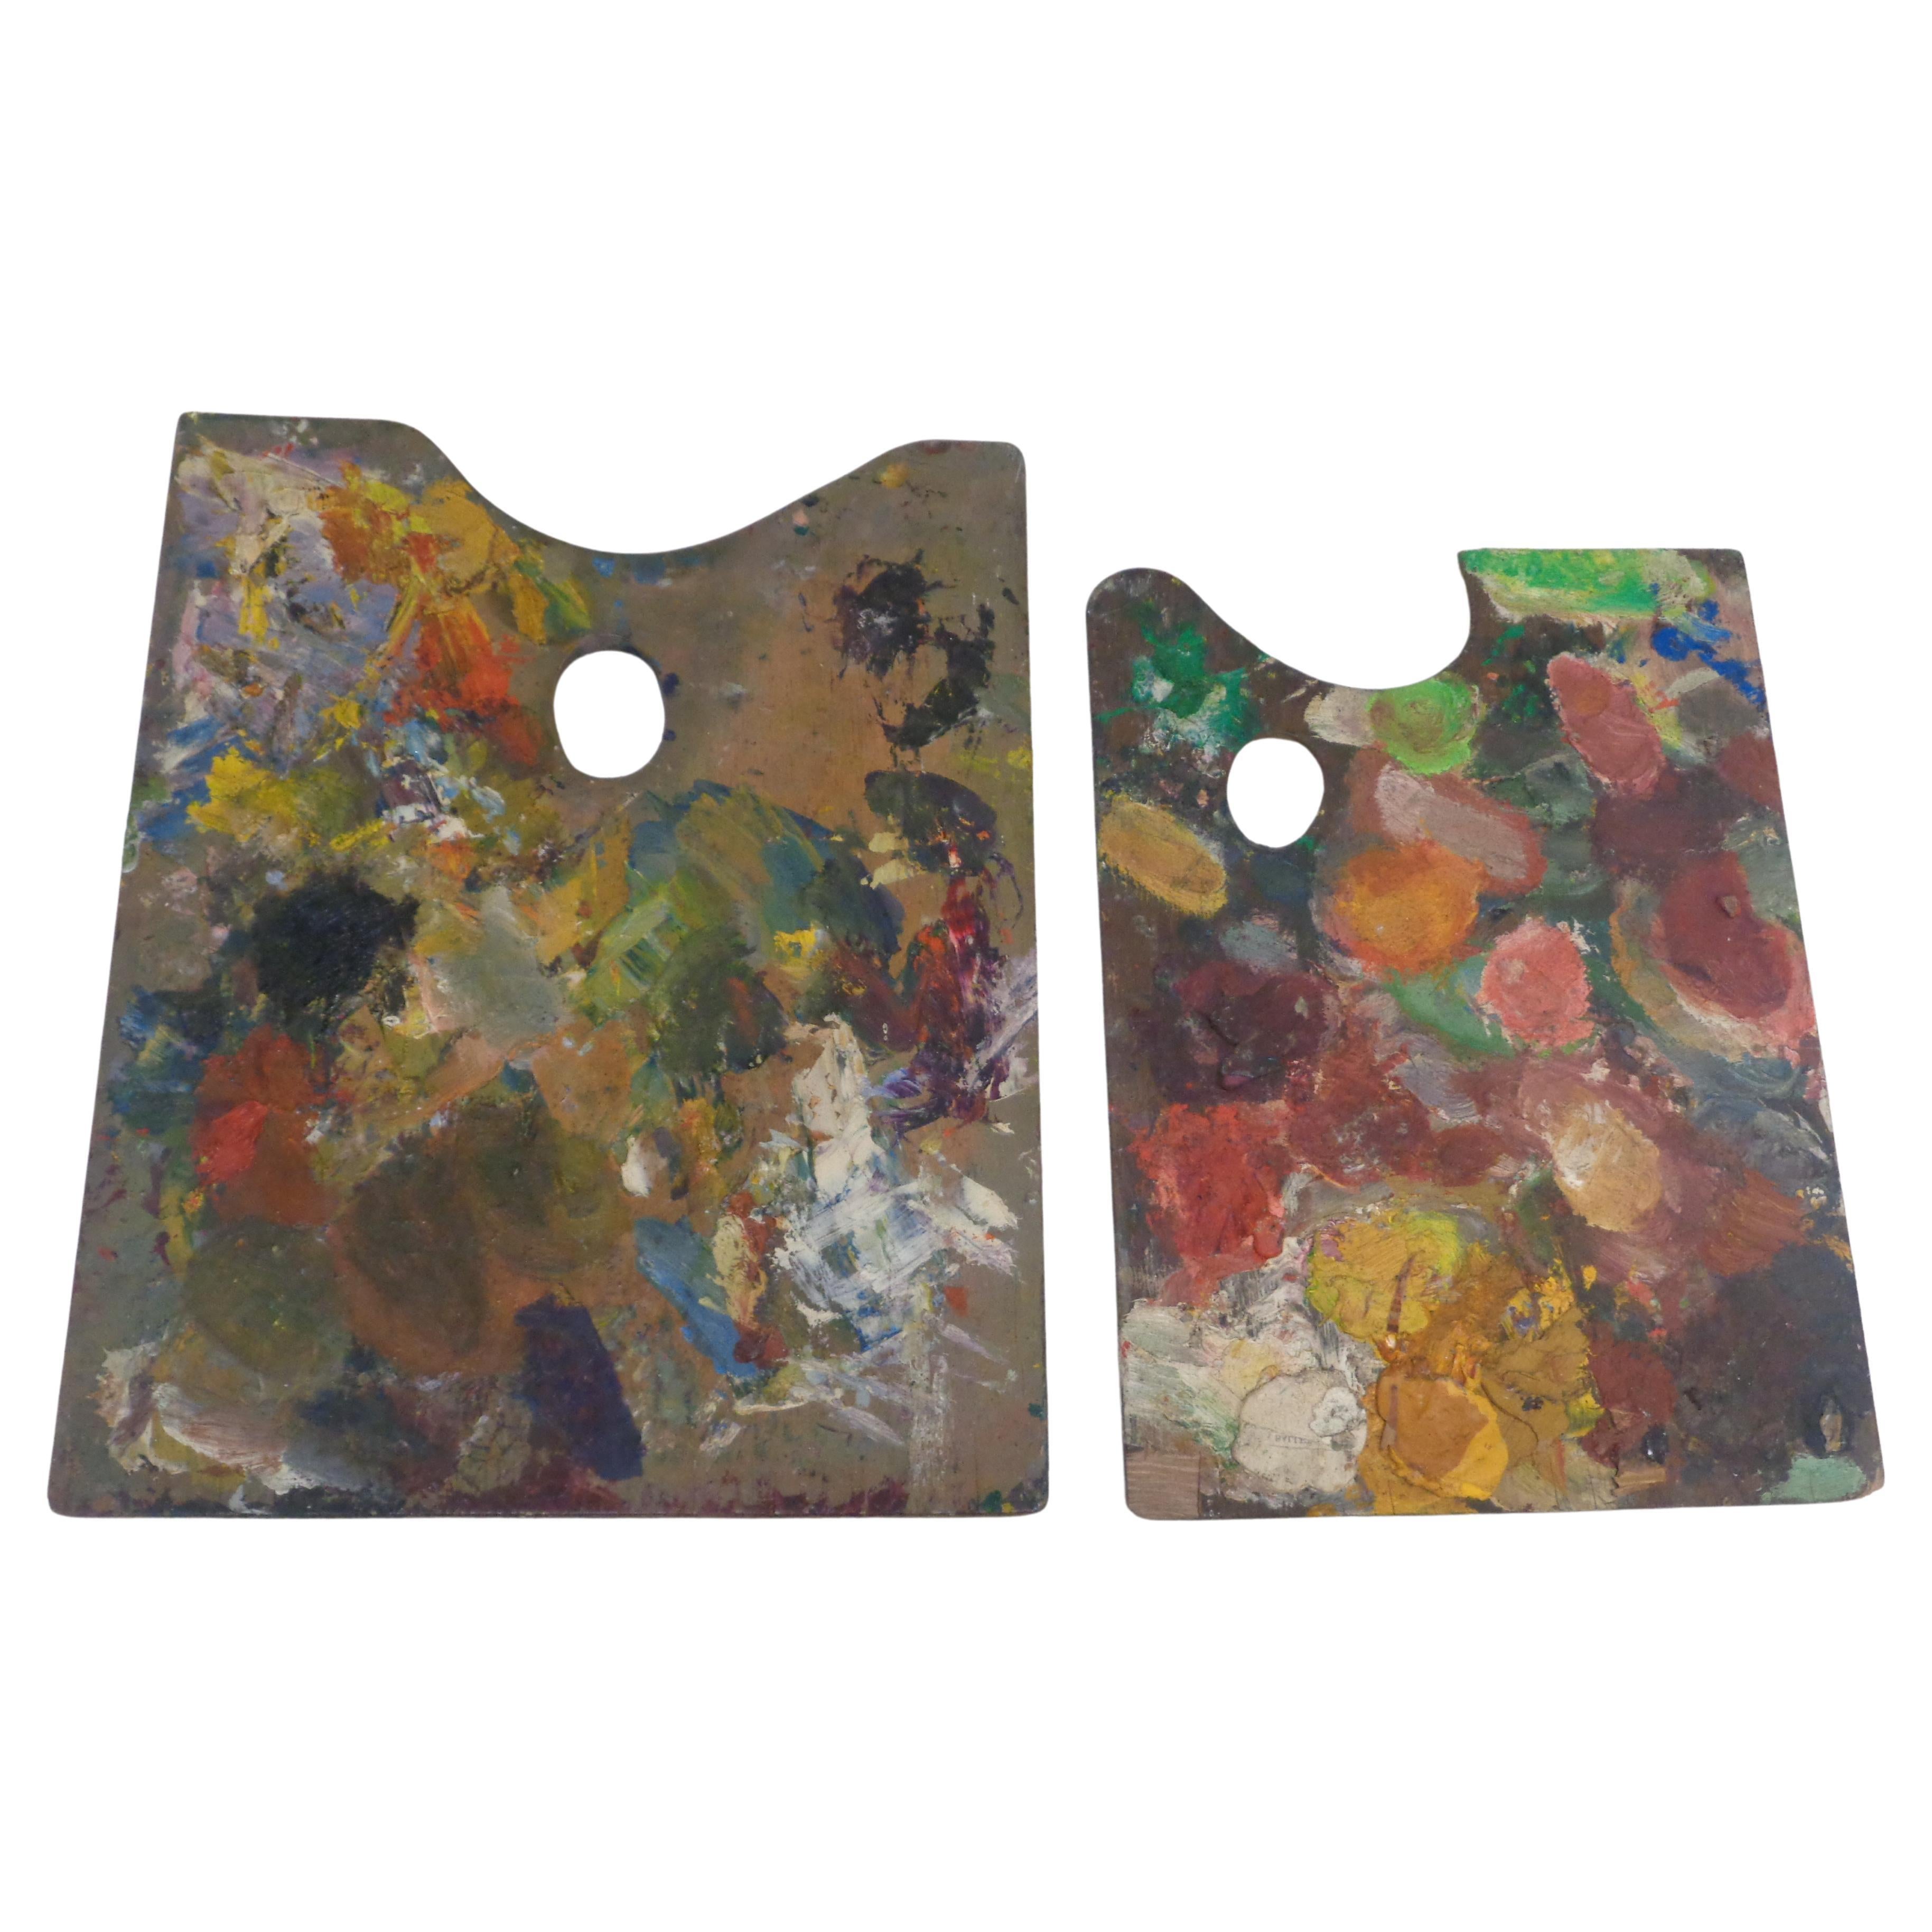 Two wooden artist palettes w/ impasto oil paint in beautifully aged thickly encrusted textural surface and great old colors. Each palette with paint on both sides. Circa 1940-1950. Large palette measure 15 1/2